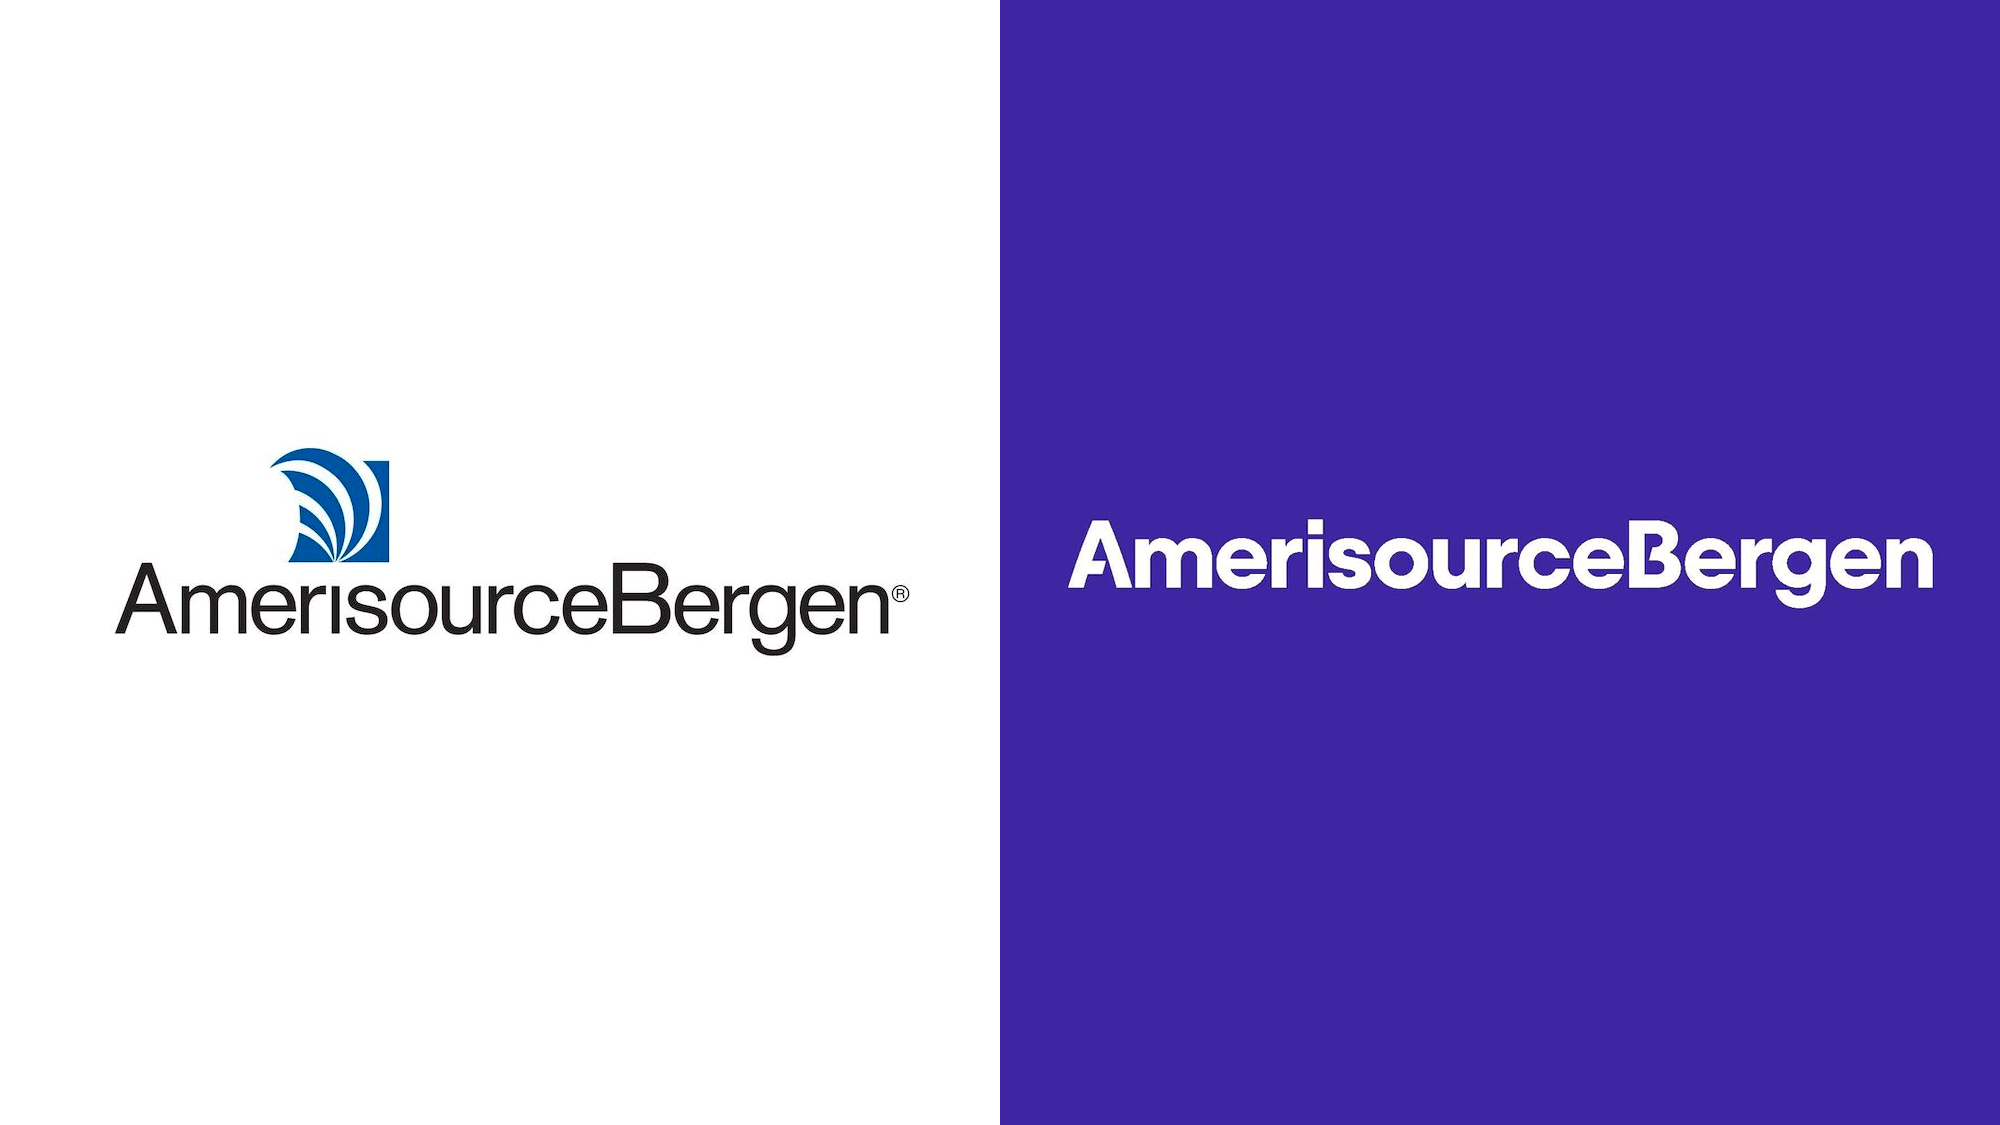 Brand New New Logo and Identity for AmerisourceBergen by MetaDesign